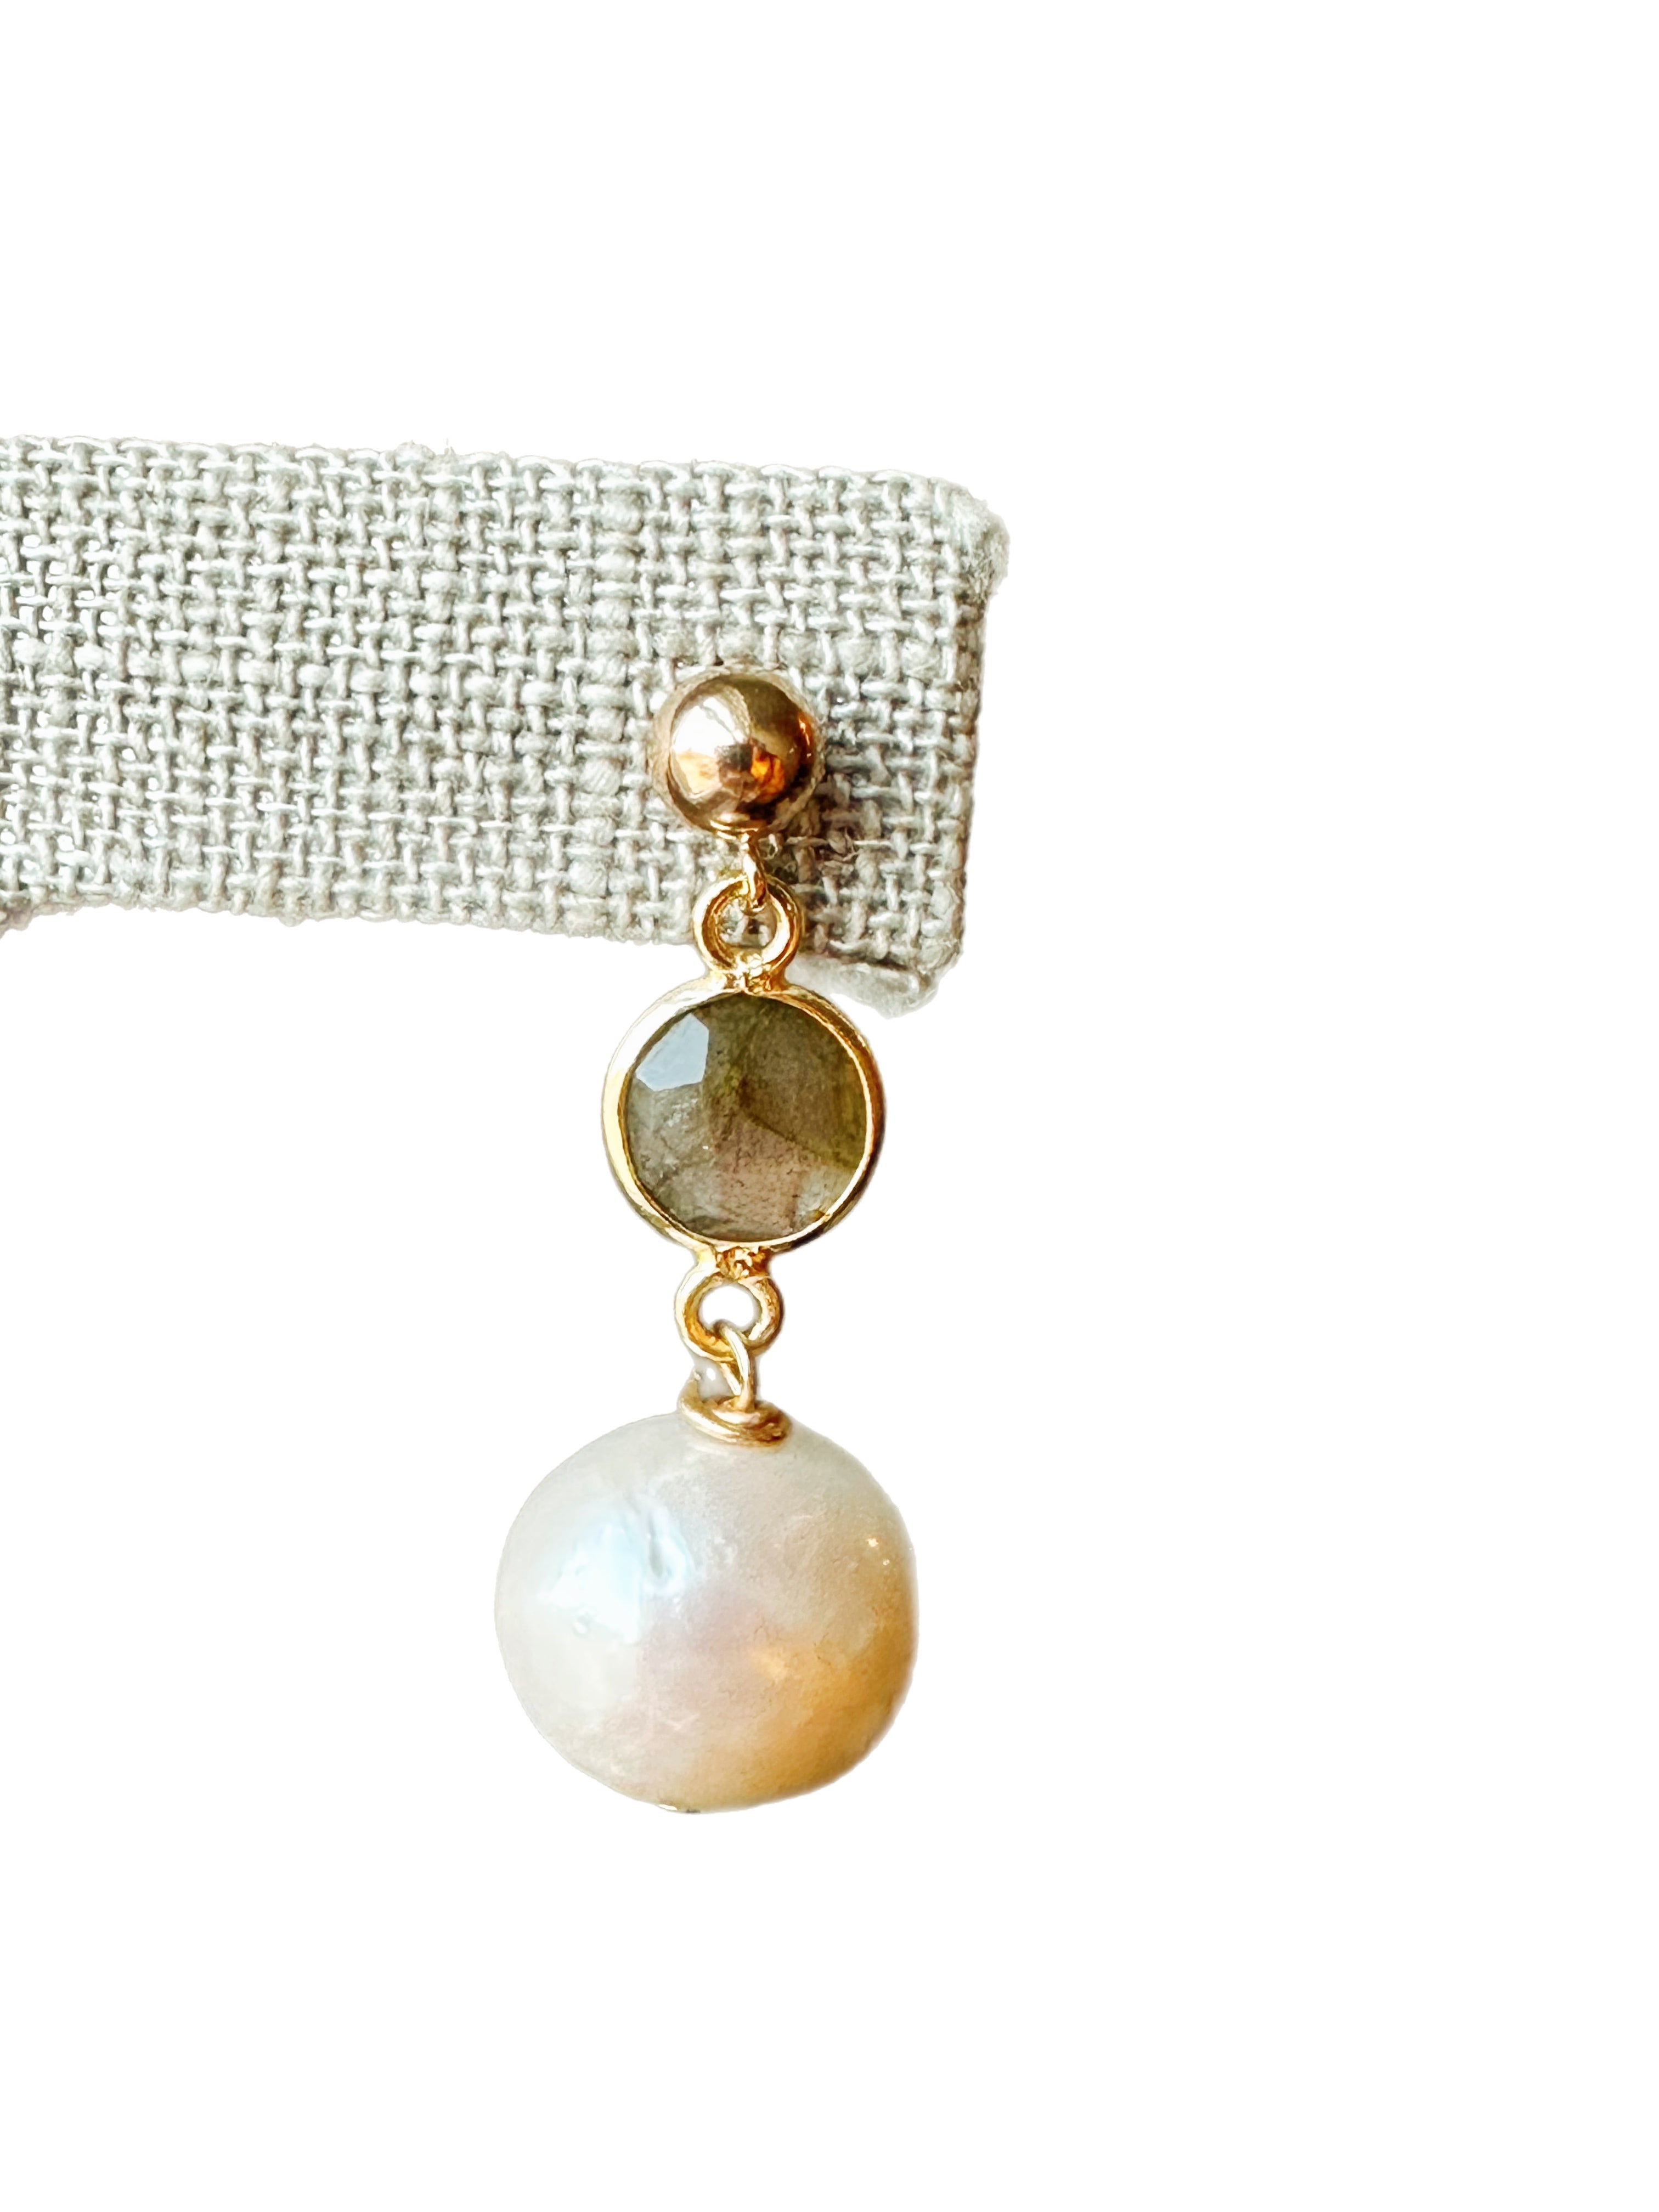 Atlantis - gold-filled stud earrings with stone and Edison pearl drop